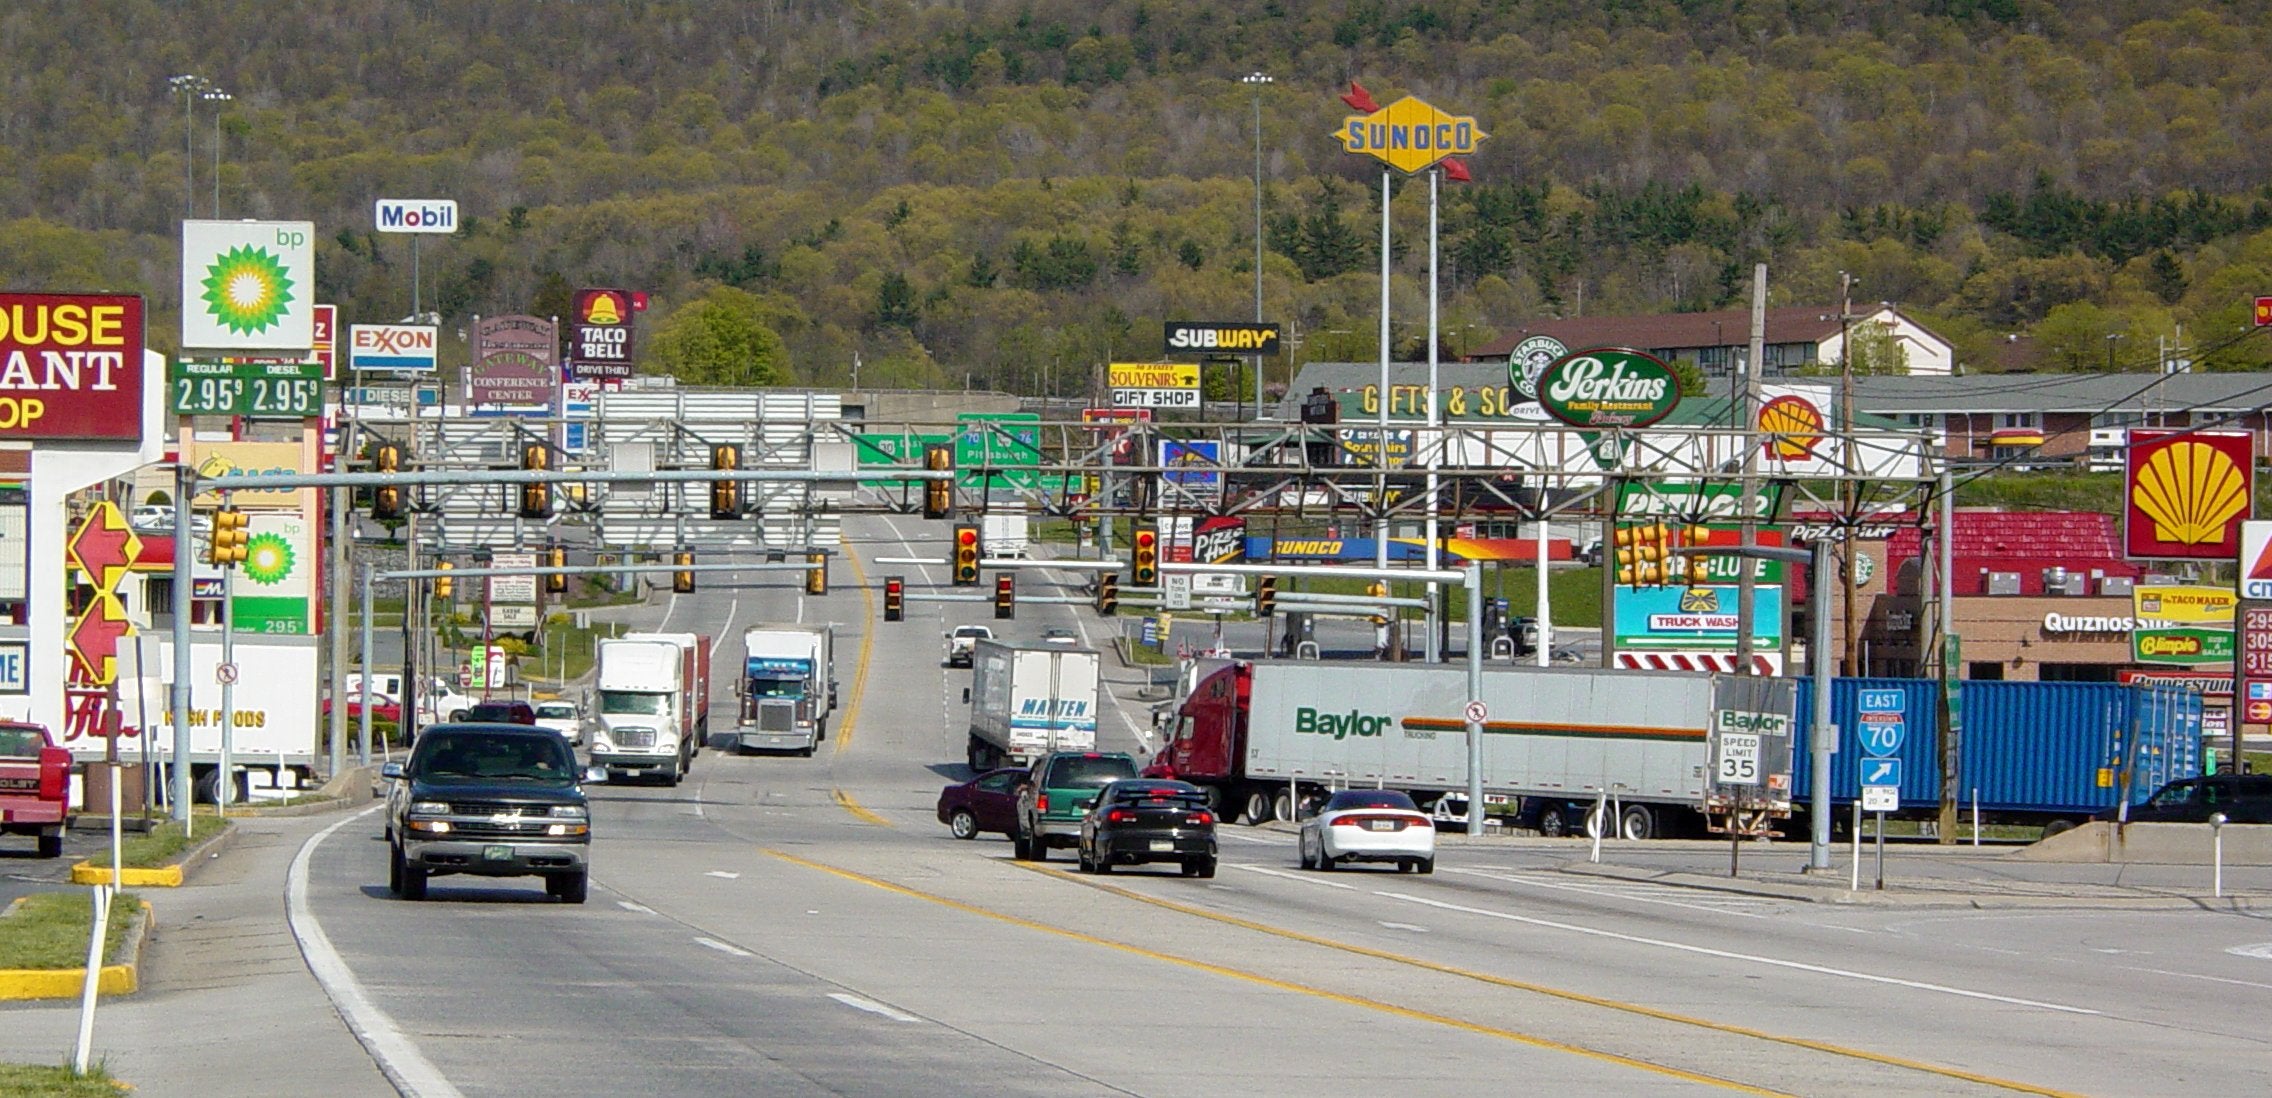  Breezewood is one of the original exits on the Pennsylvania Turnpike. It's known as the 